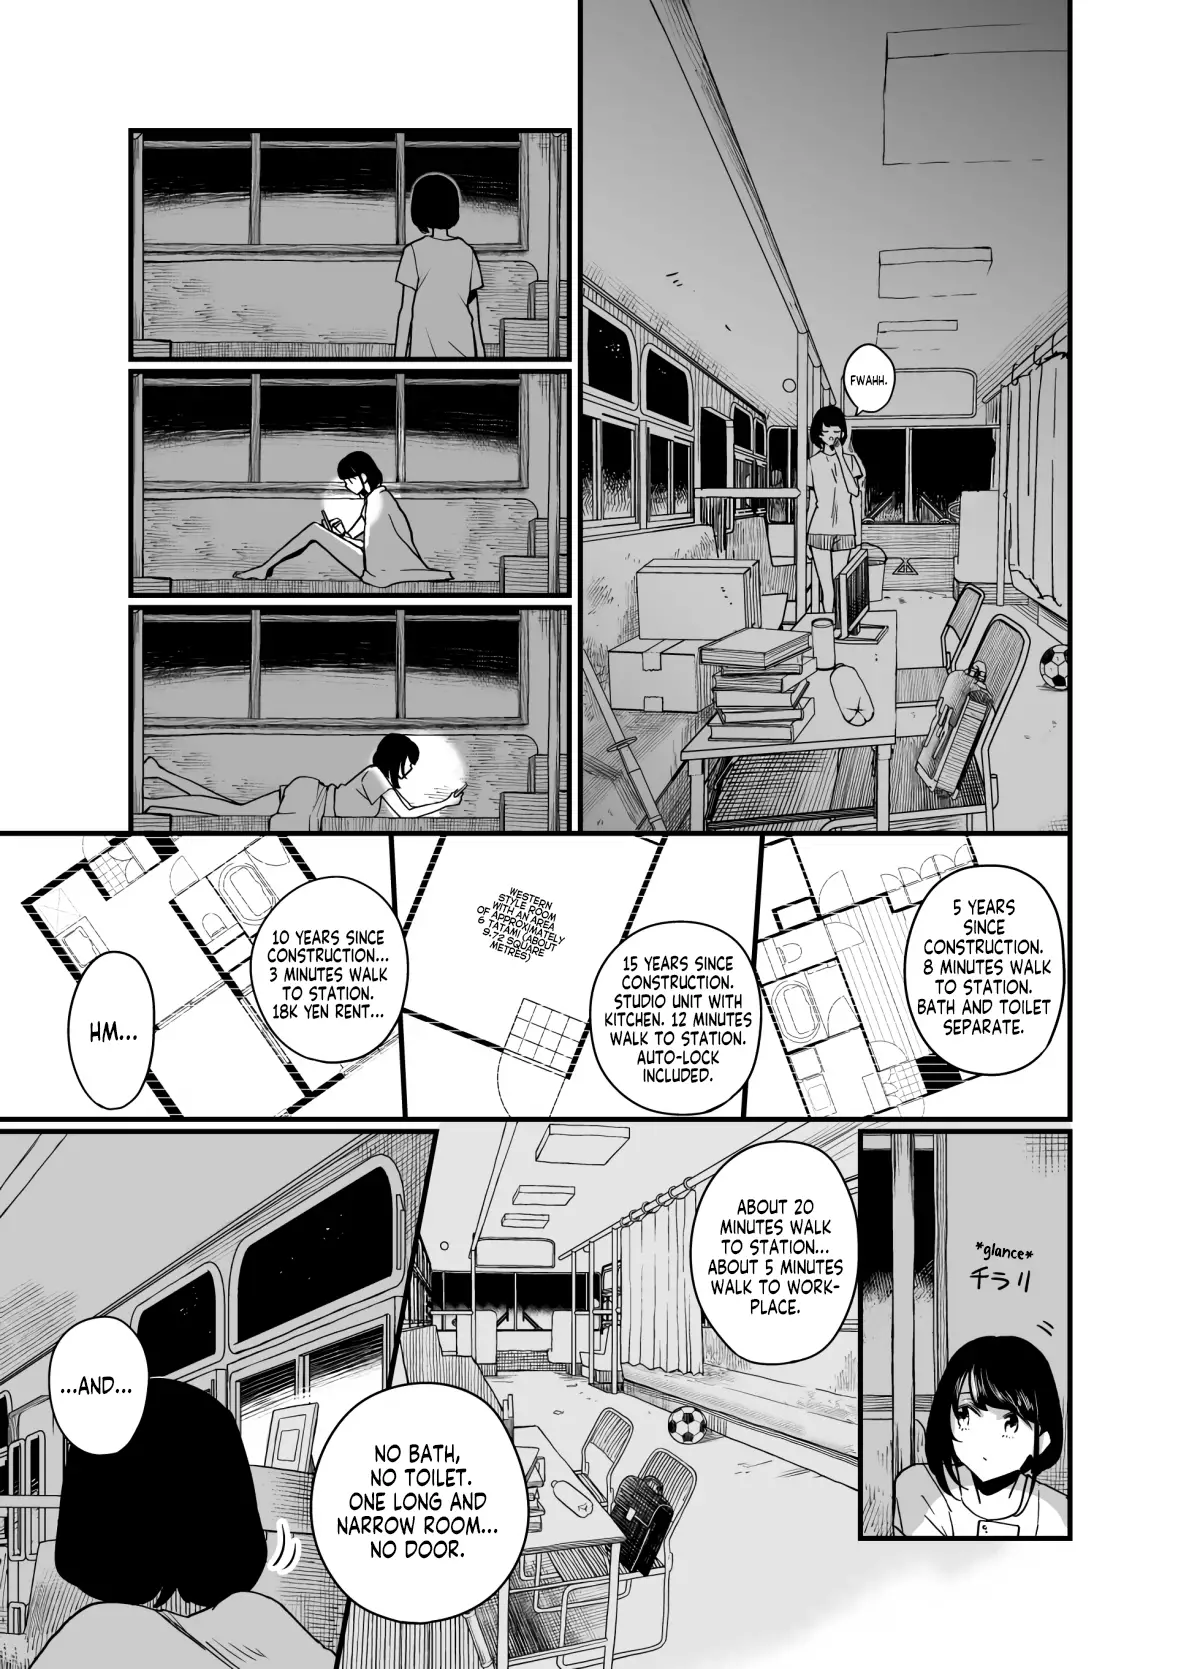 Living In An Abandoned Bus - 1 page 15-a7abfda3